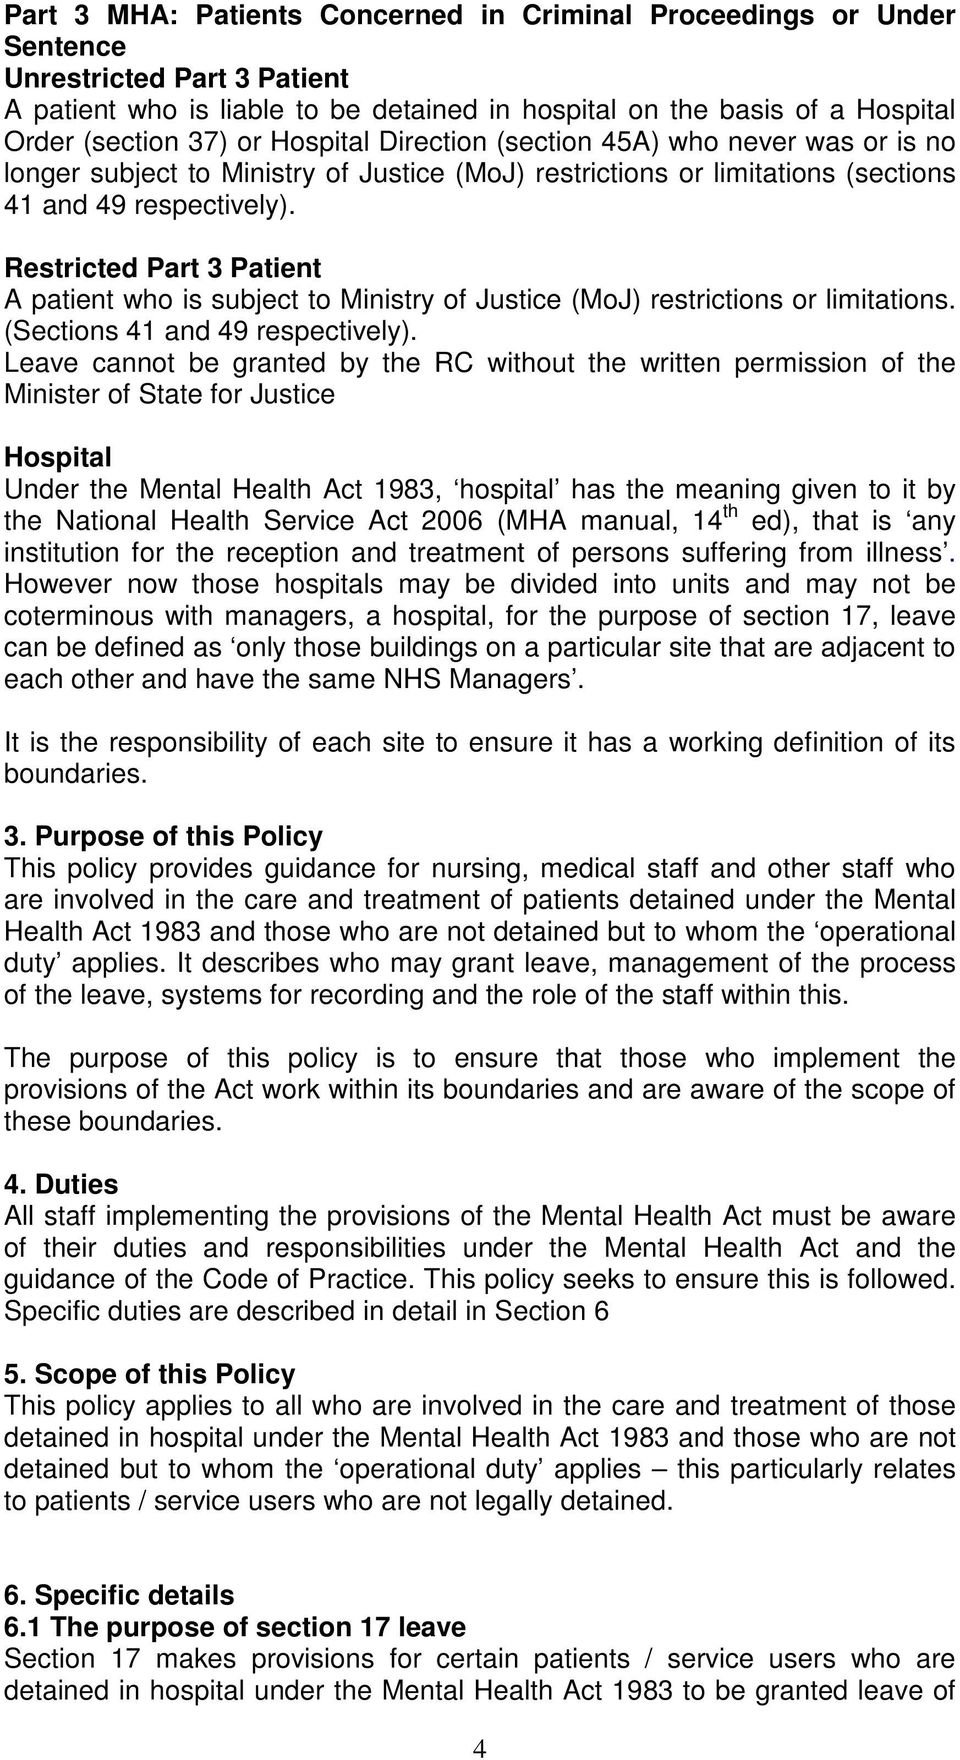 Restricted Part 3 Patient A patient who is subject to Ministry of Justice (MoJ) restrictions or limitations. (Sections 41 and 49 respectively).